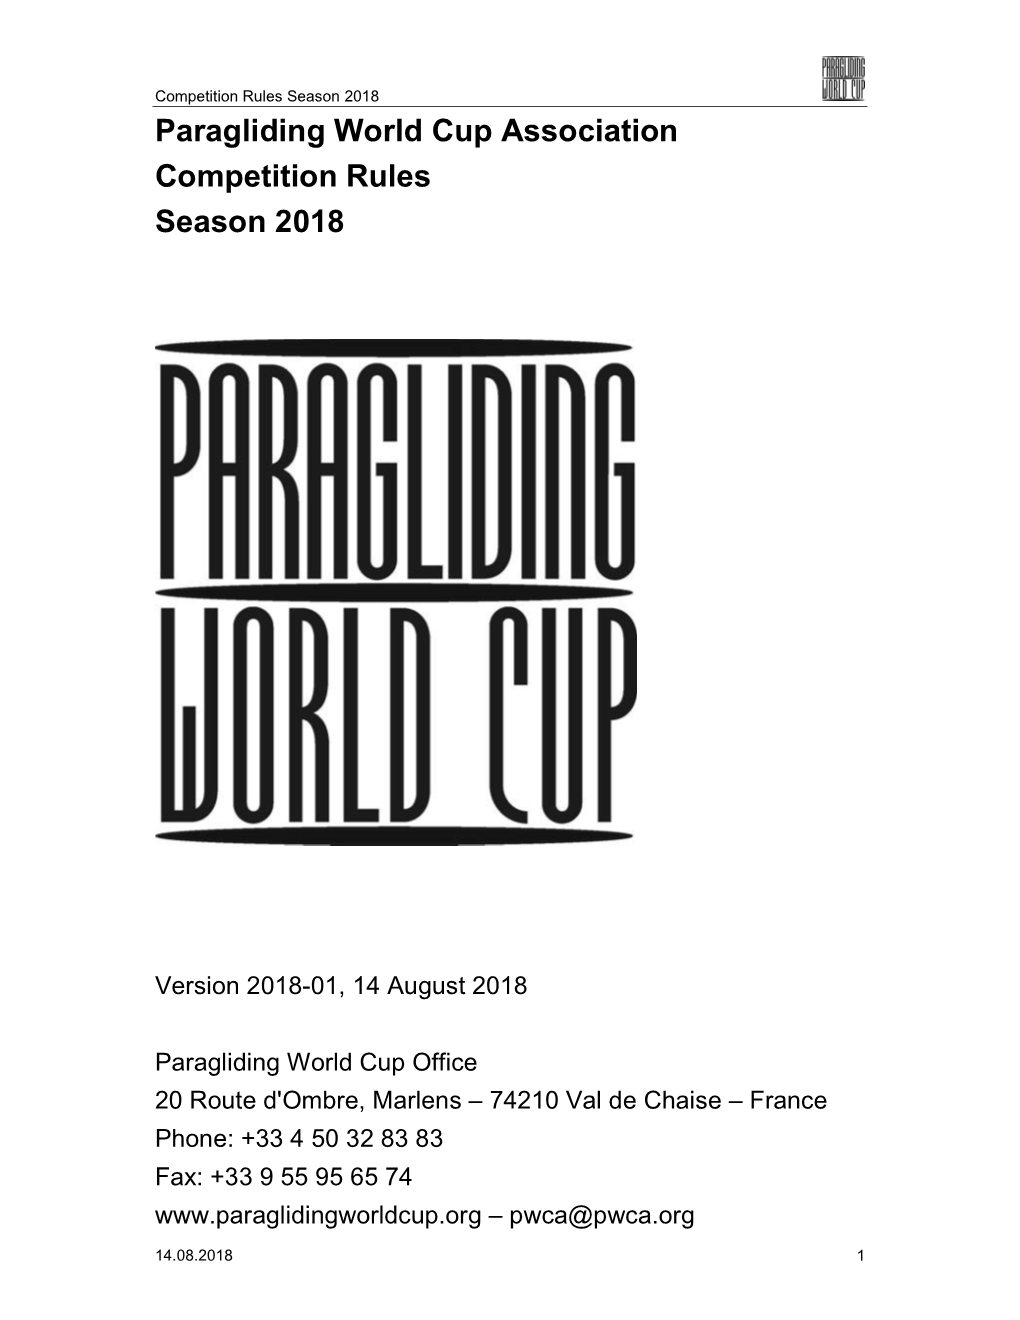 Paragliding World Cup Association Competition Rules Season 2018